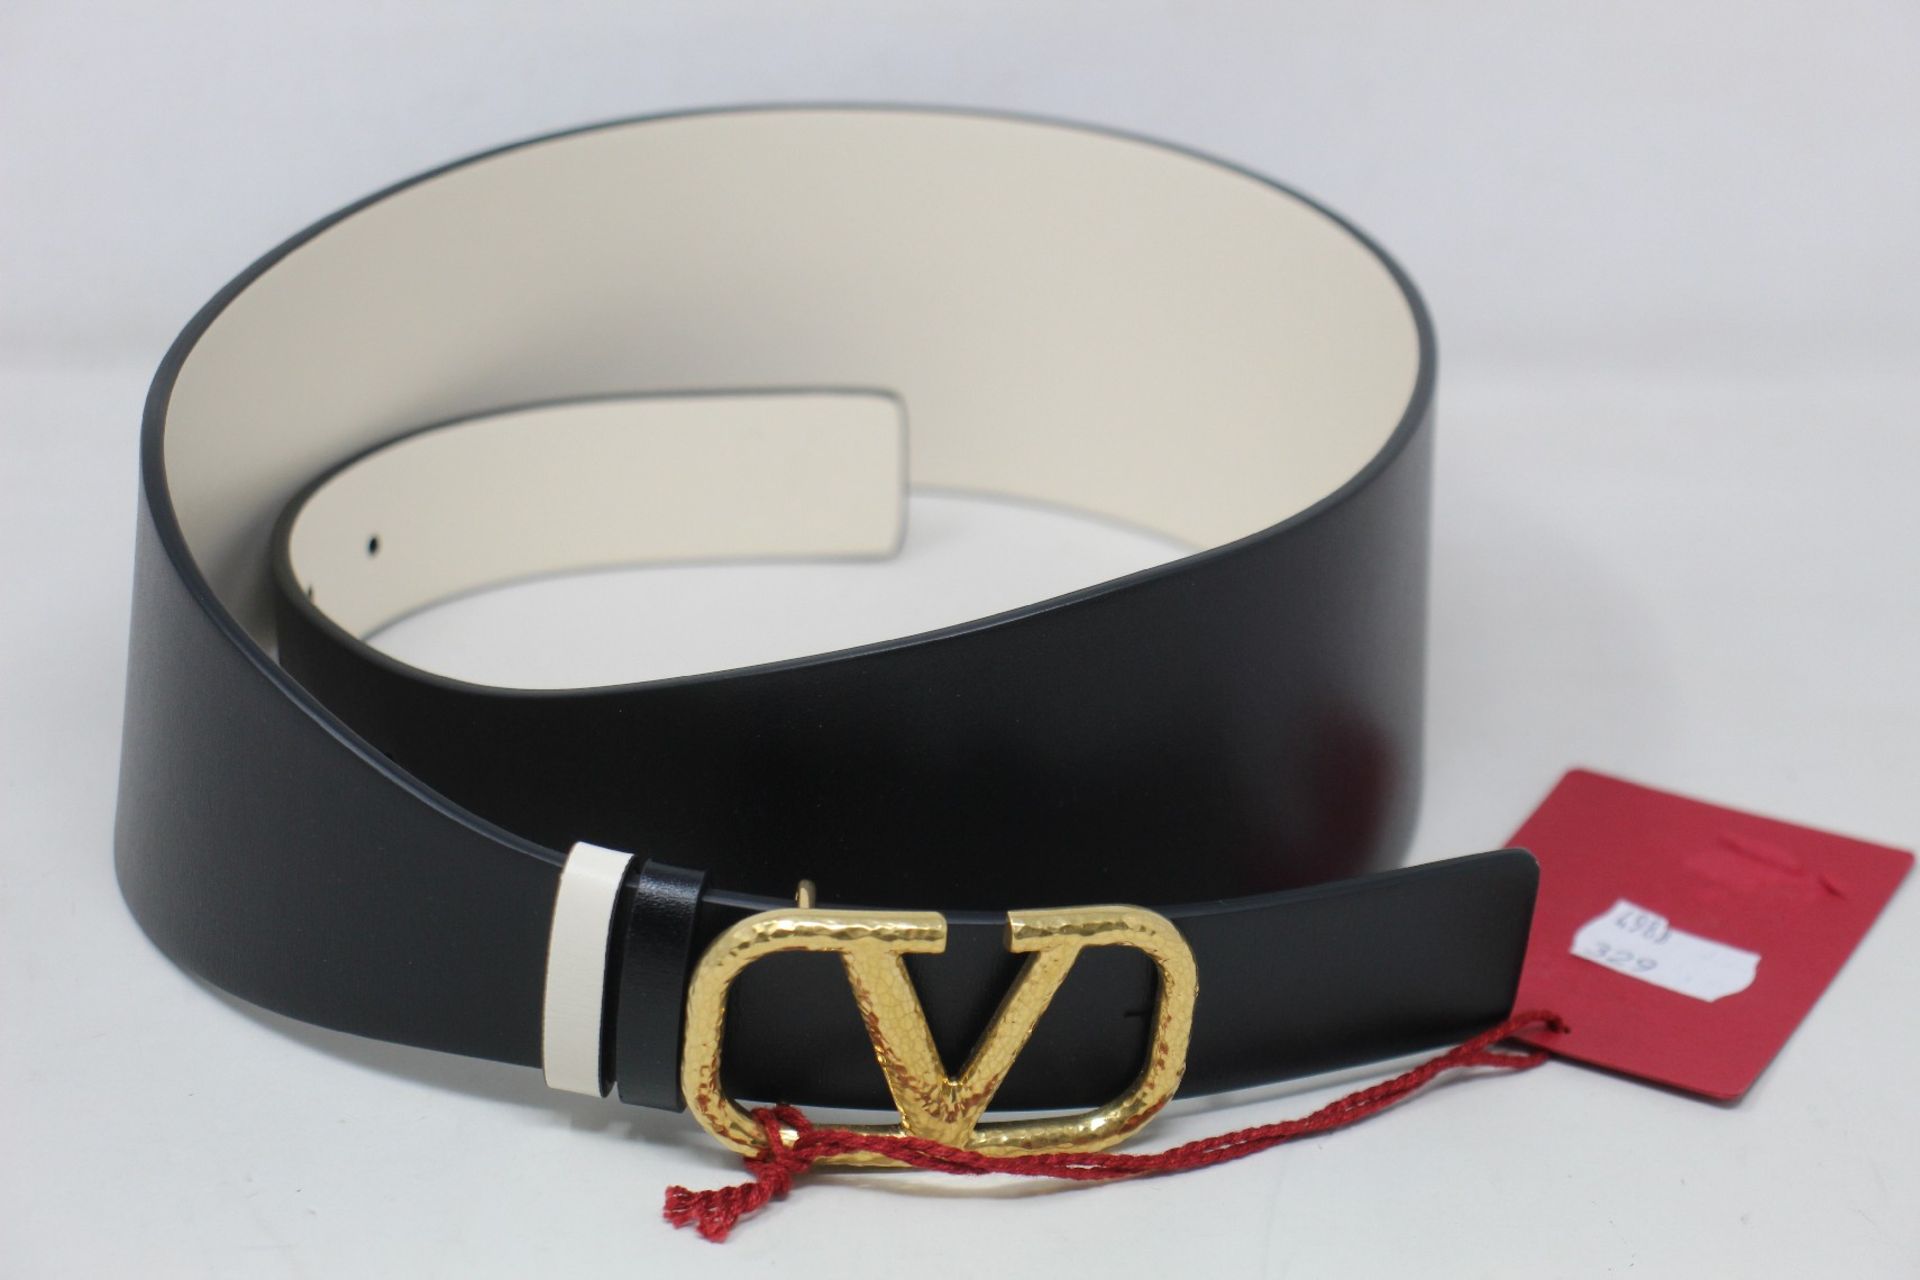 An as new Valentino black leather belt (Size 80).